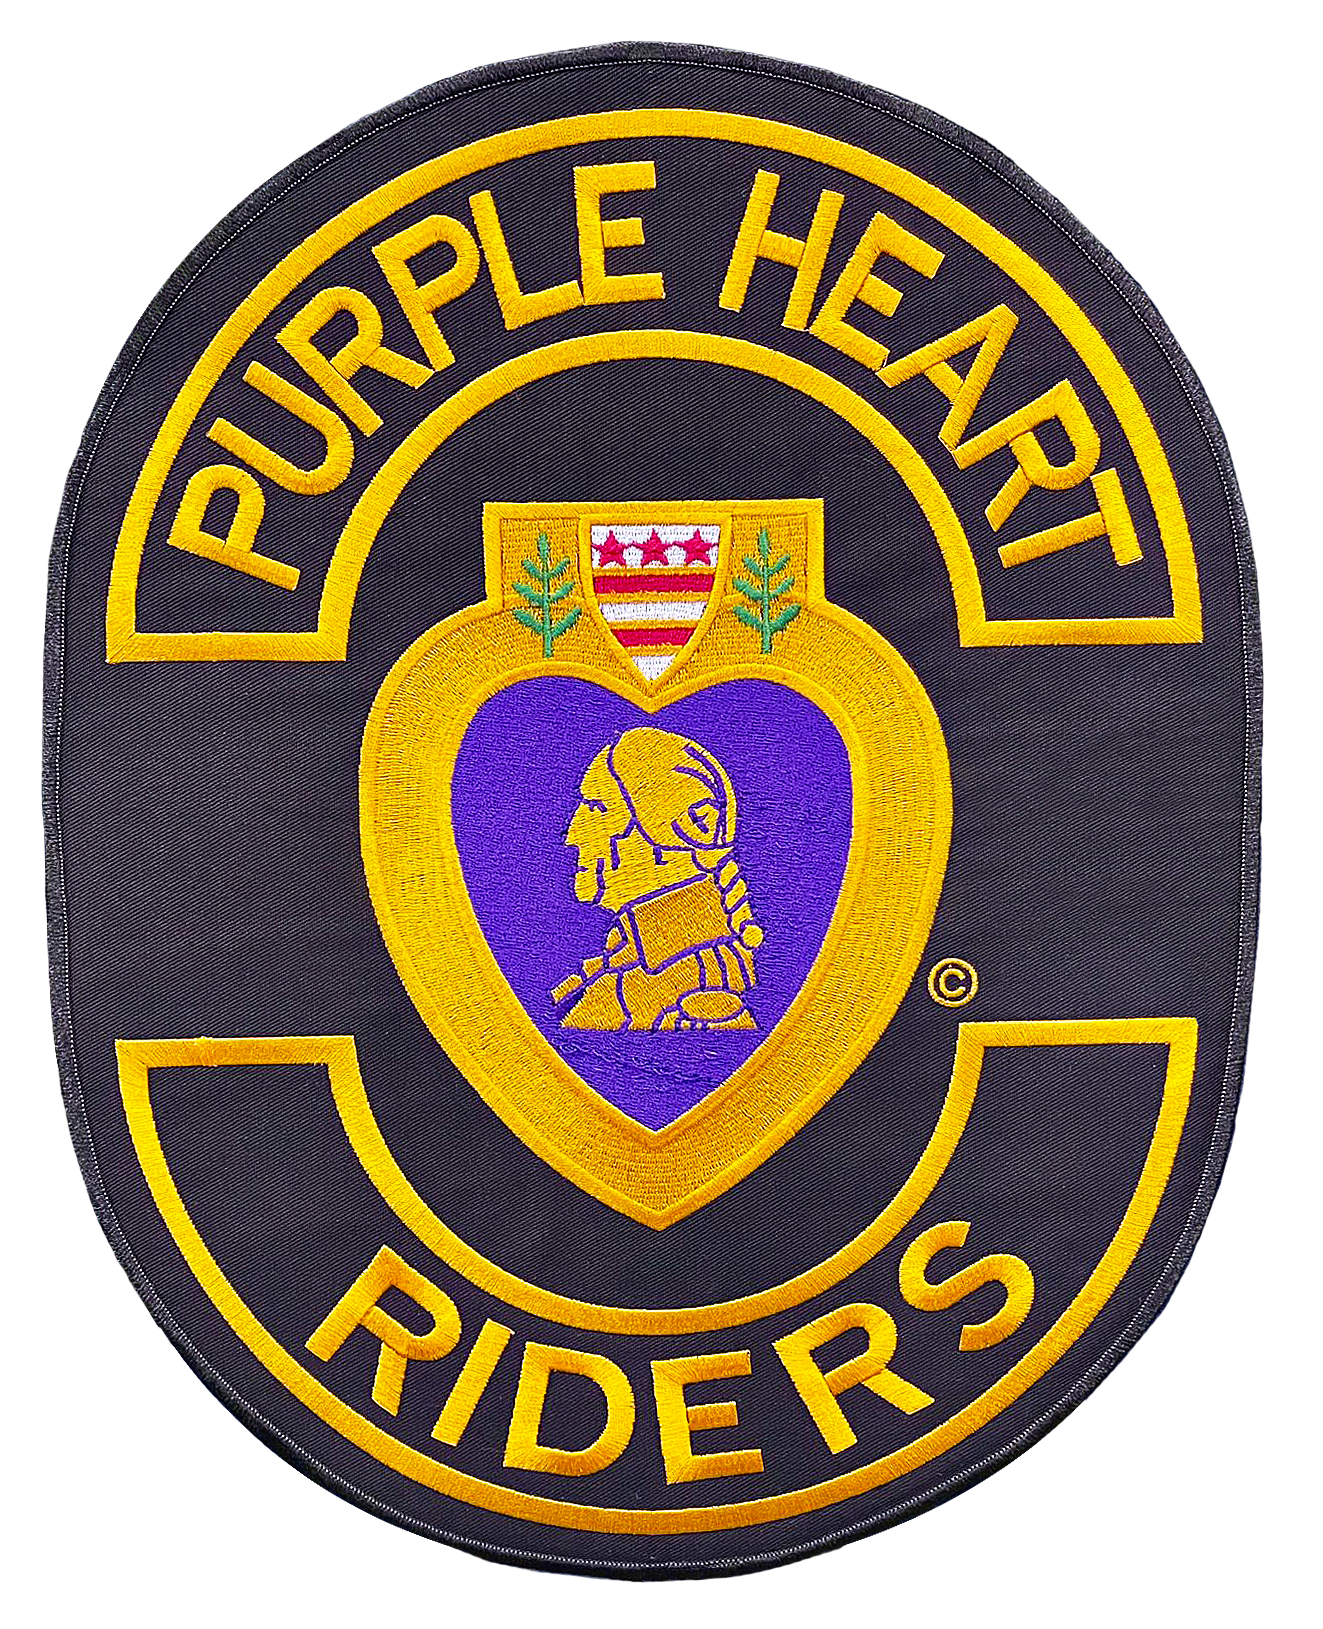 A patch that says purple heart riders on it